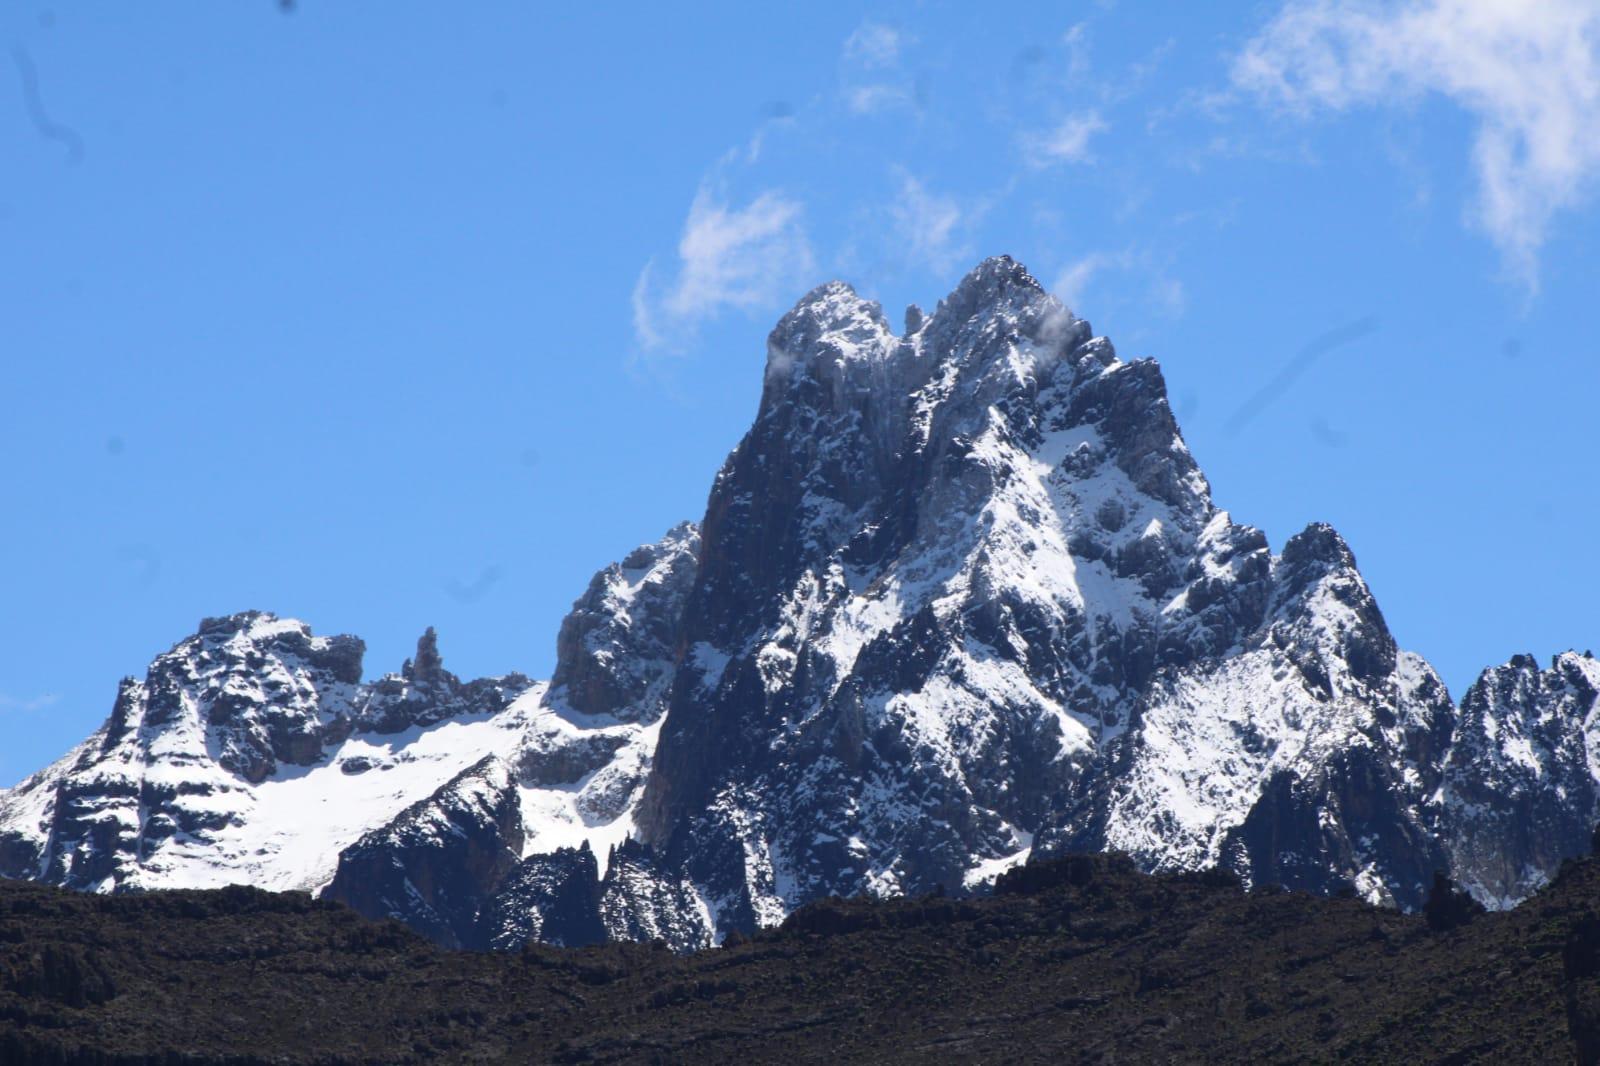 2. From Talking Trees to Magical Creatures: Exploring the Fascinating Characters of Mount Kenya's Folklore